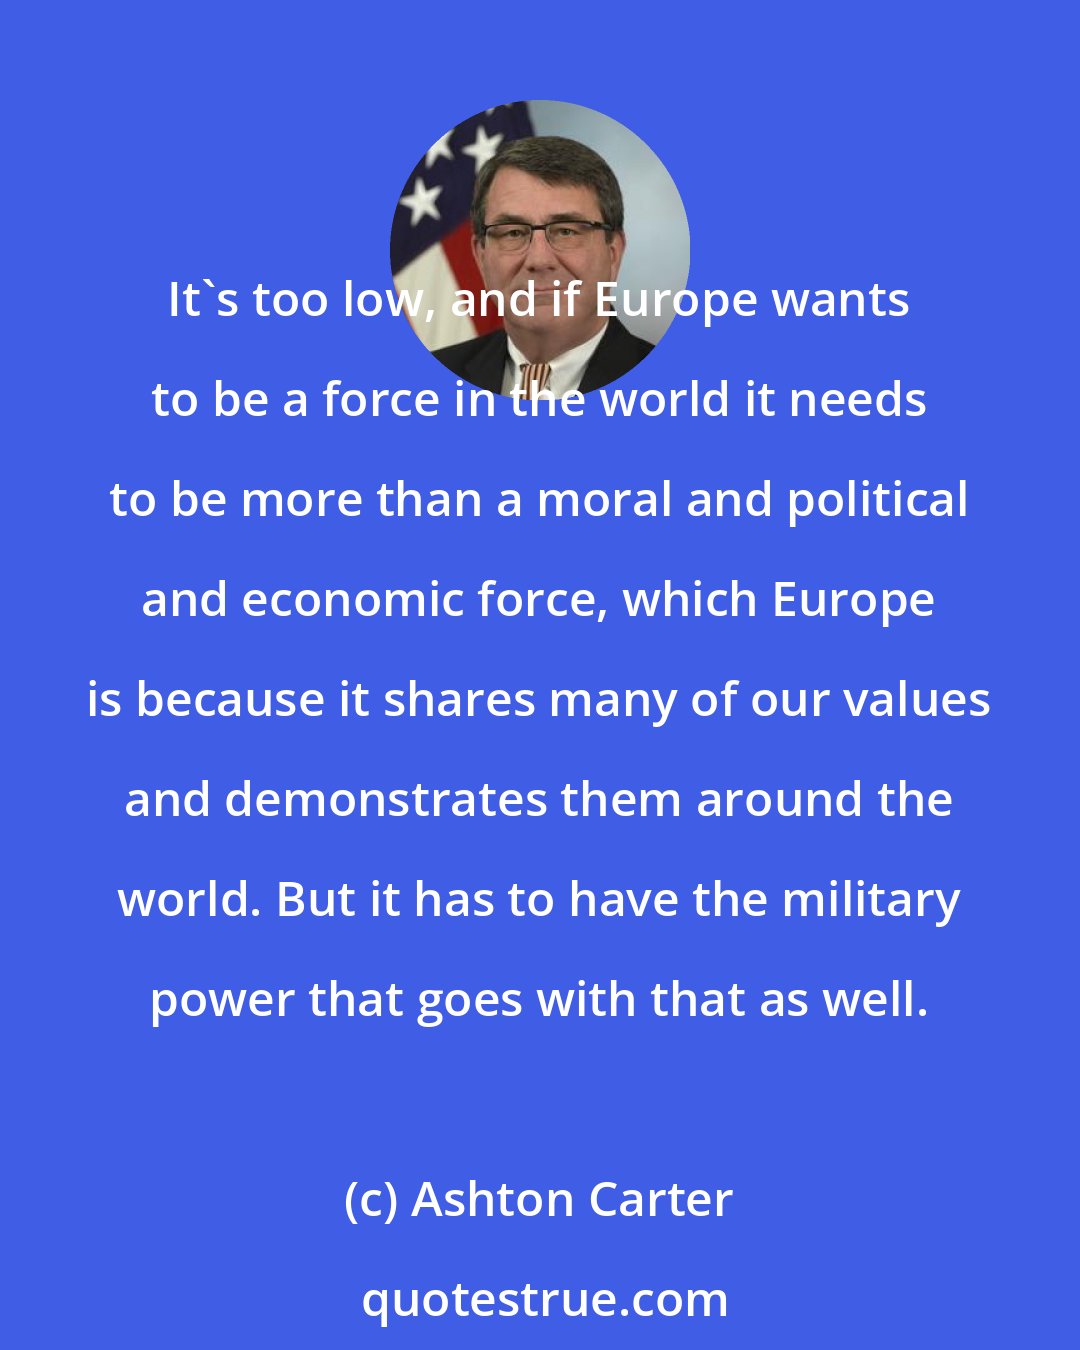 Ashton Carter: It's too low, and if Europe wants to be a force in the world it needs to be more than a moral and political and economic force, which Europe is because it shares many of our values and demonstrates them around the world. But it has to have the military power that goes with that as well.